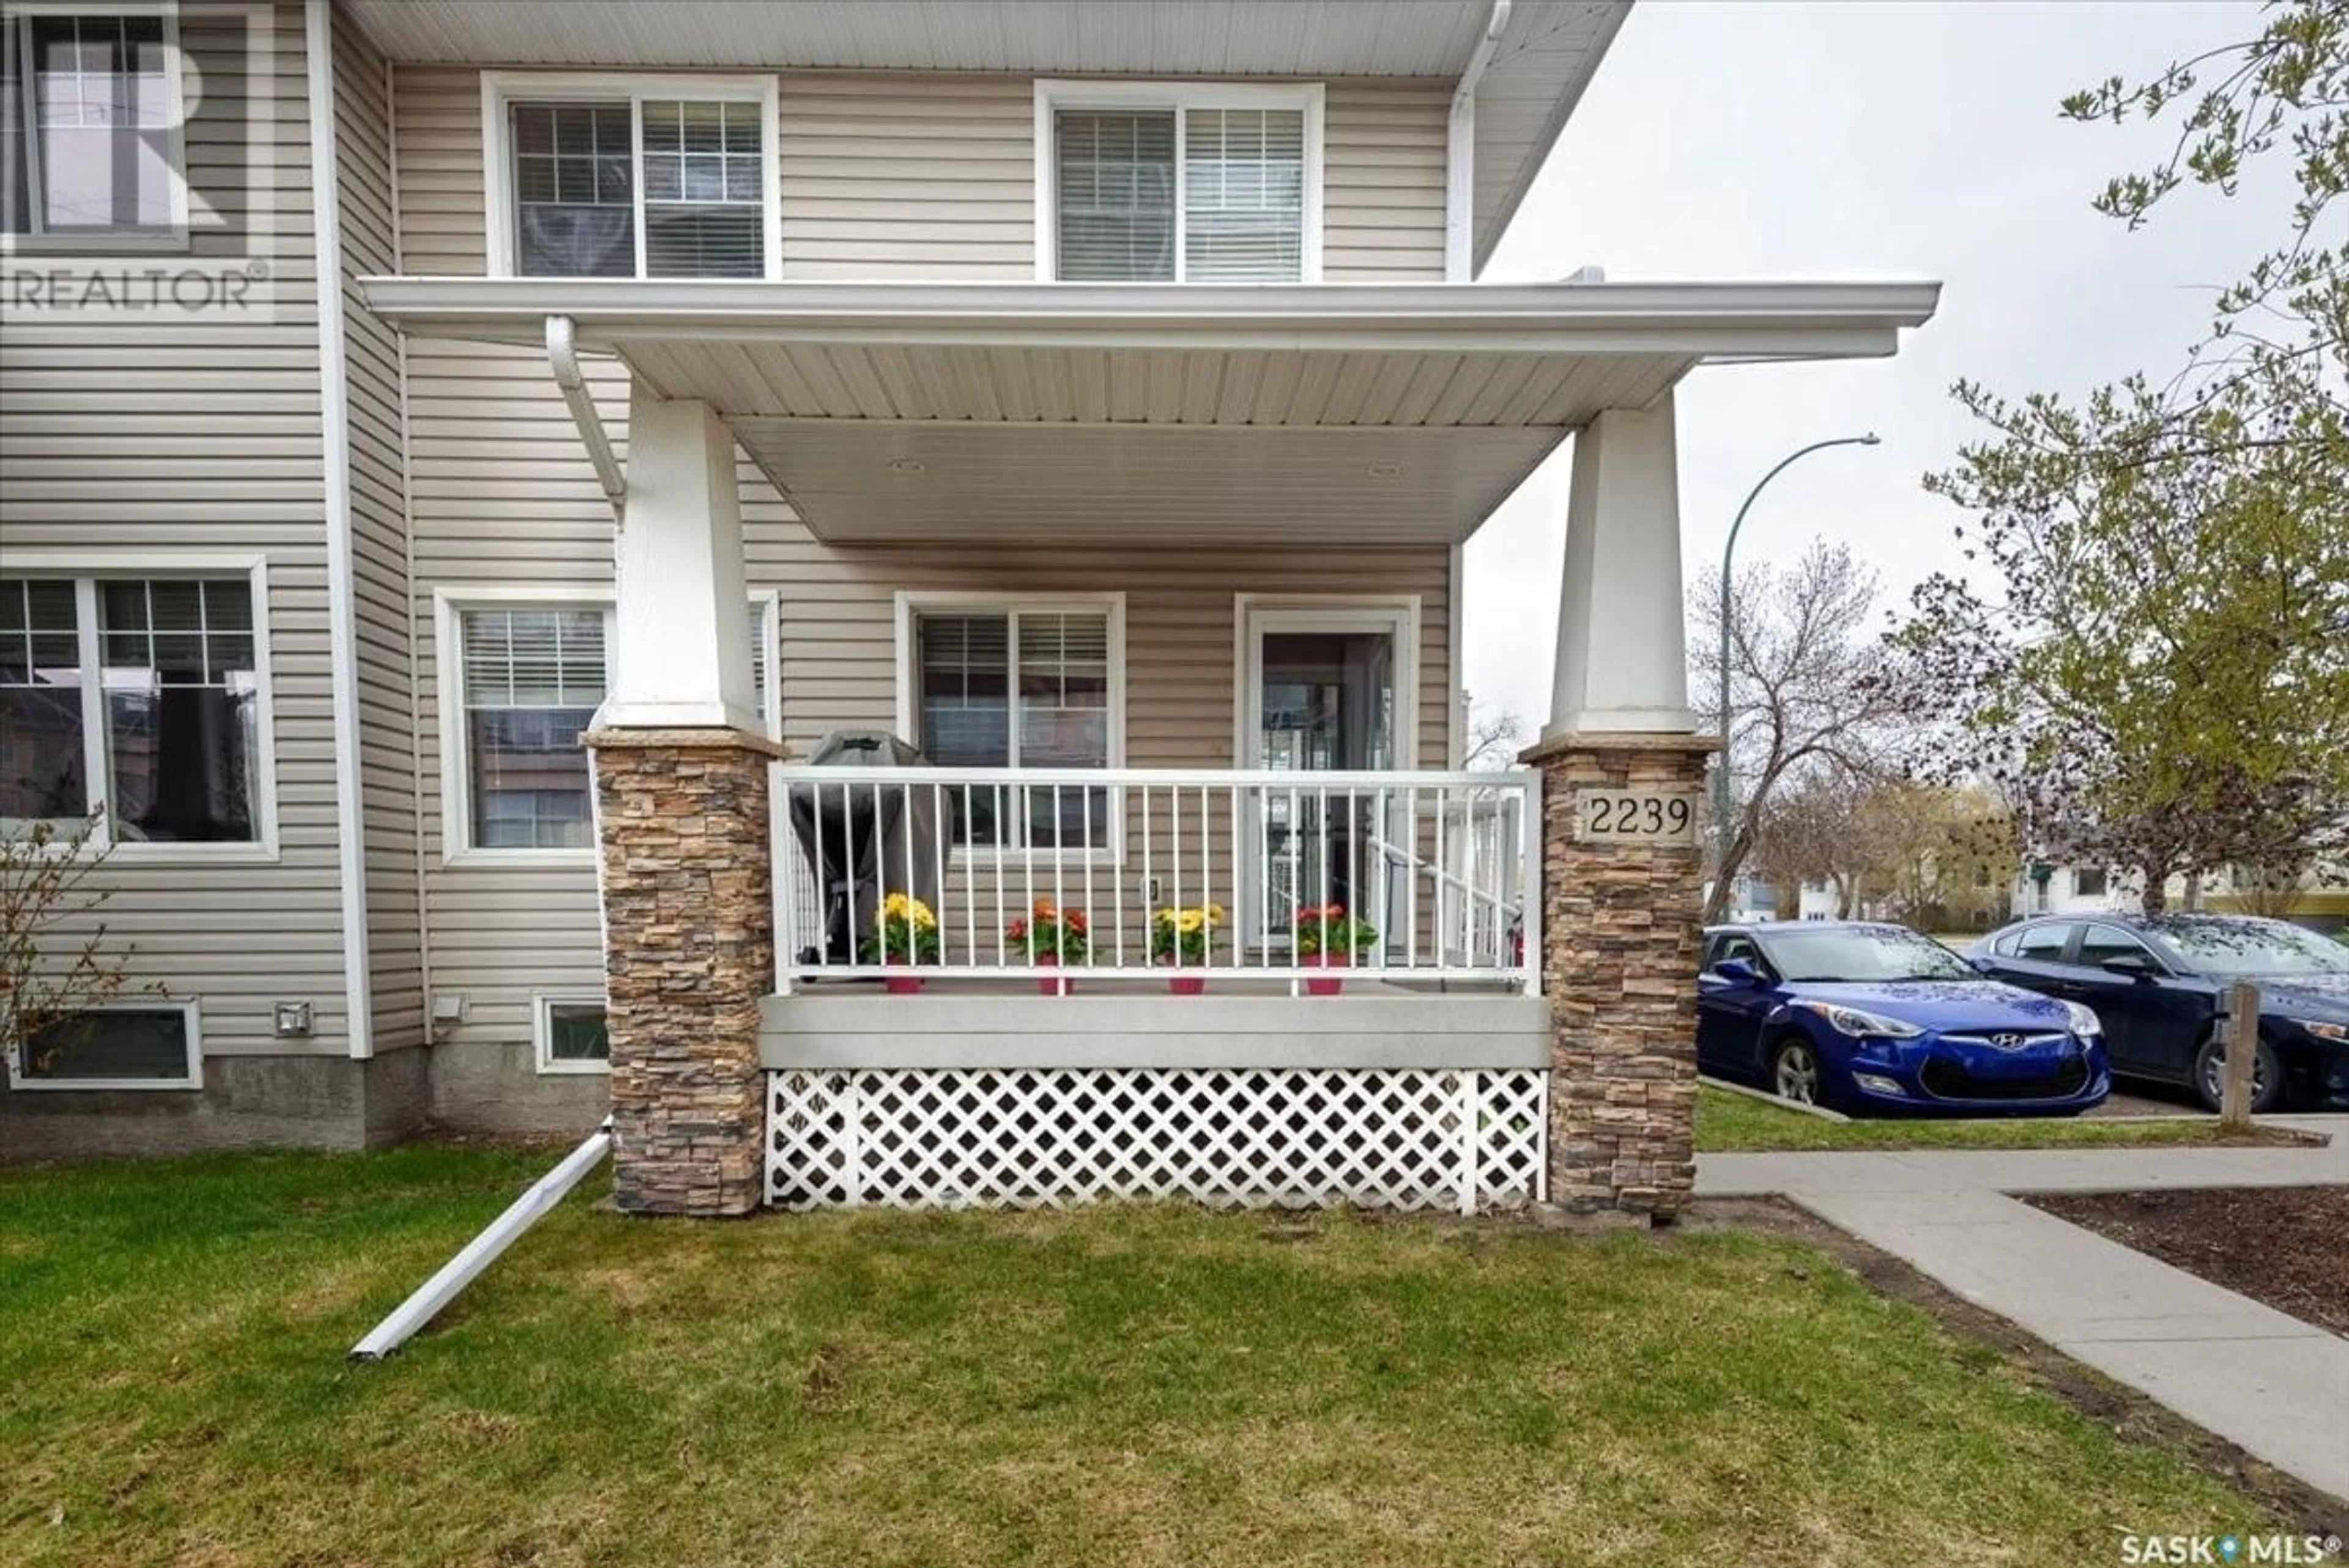 A pic from exterior of the house or condo for 2239 Treetop LANE, Regina Saskatchewan S4P4V8